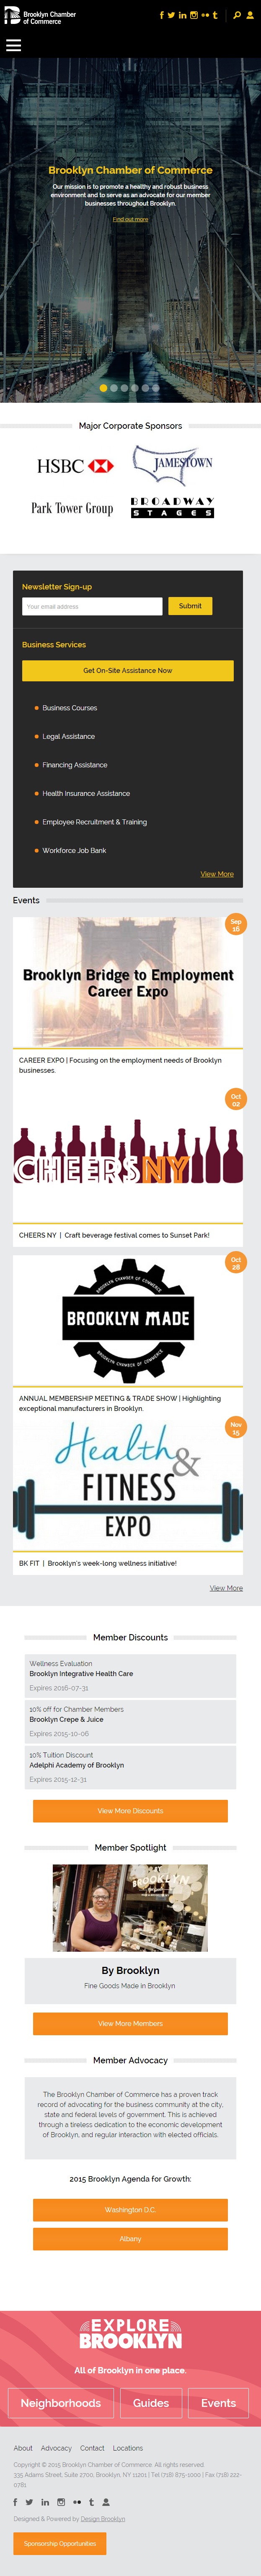 Mobile view of Brooklyn Chamber of Commerce website